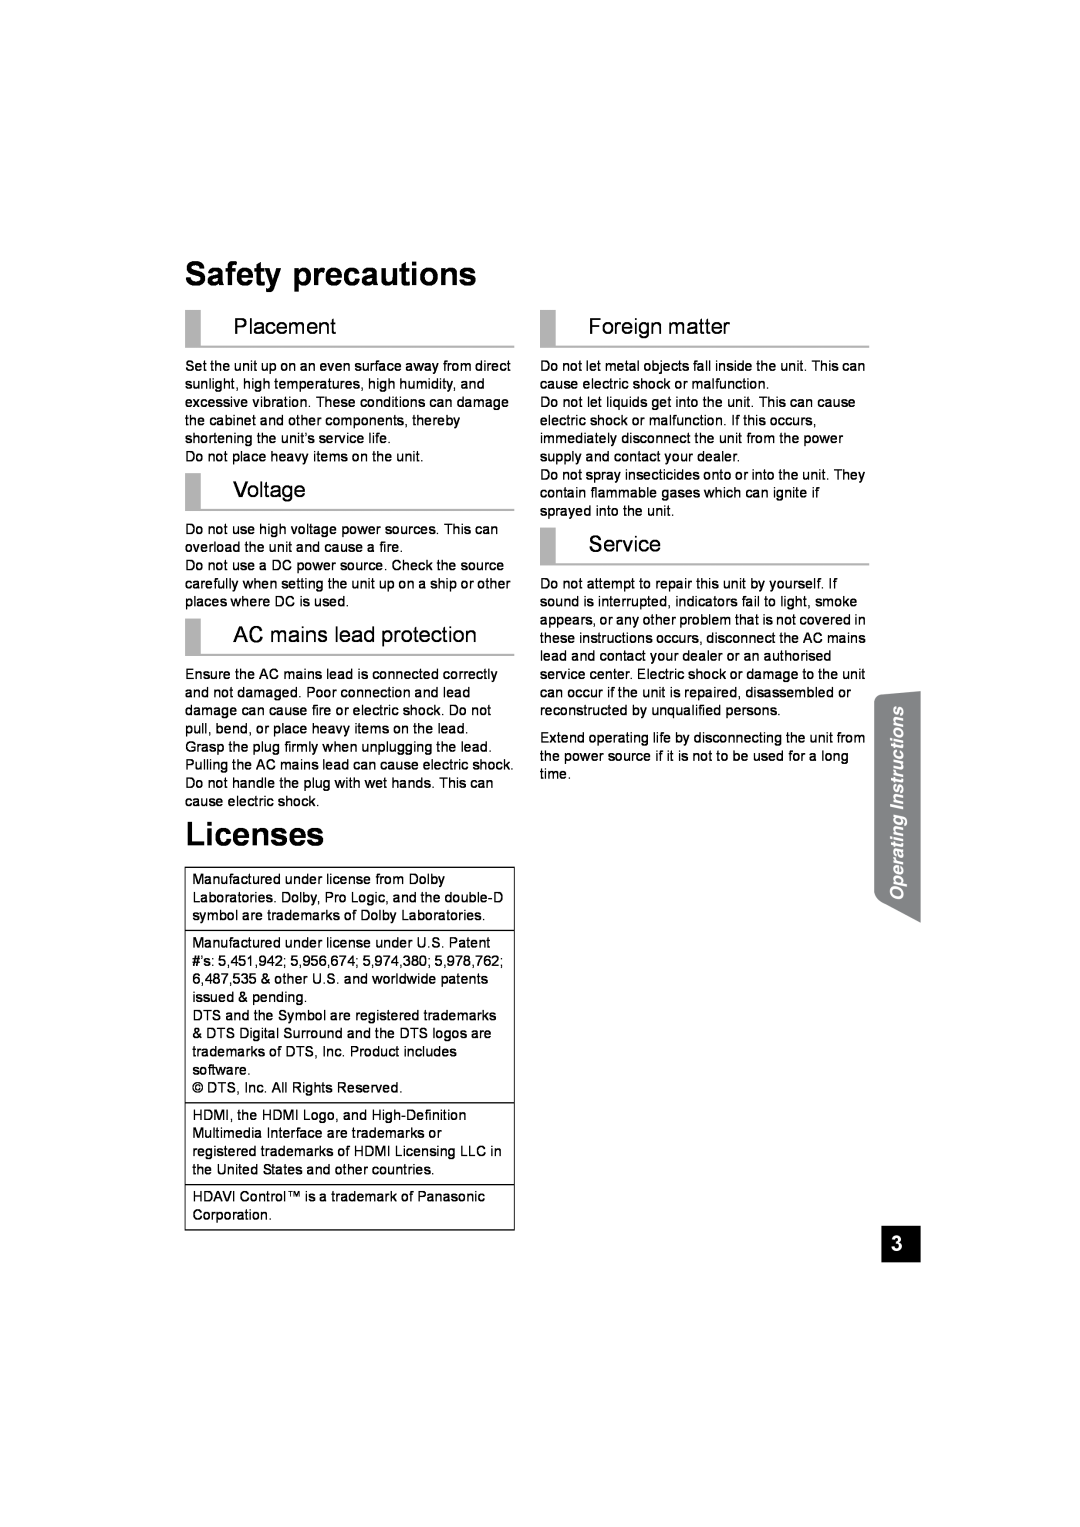 Panasonic SC-HTB10 Safety precautions, Licenses, Placement, Voltage, AC mains lead protection, Foreign matter, Service 